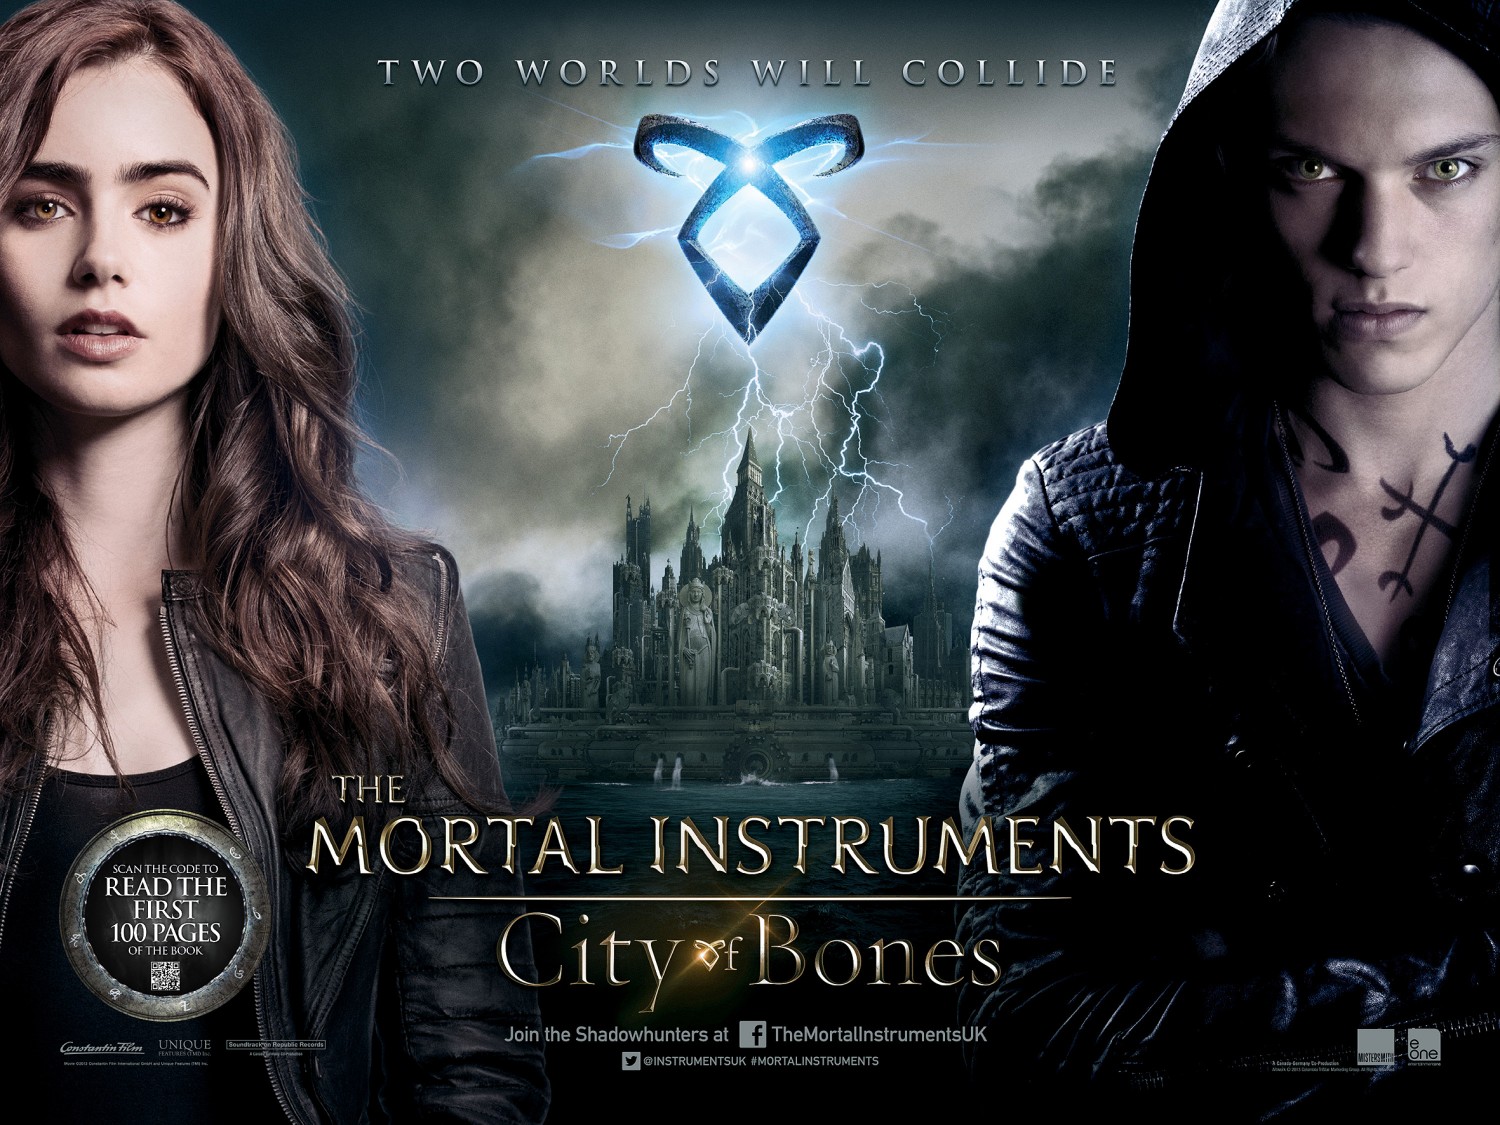 Extra Large Movie Poster Image for The Mortal Instruments: City of Bones (#5 of 15)